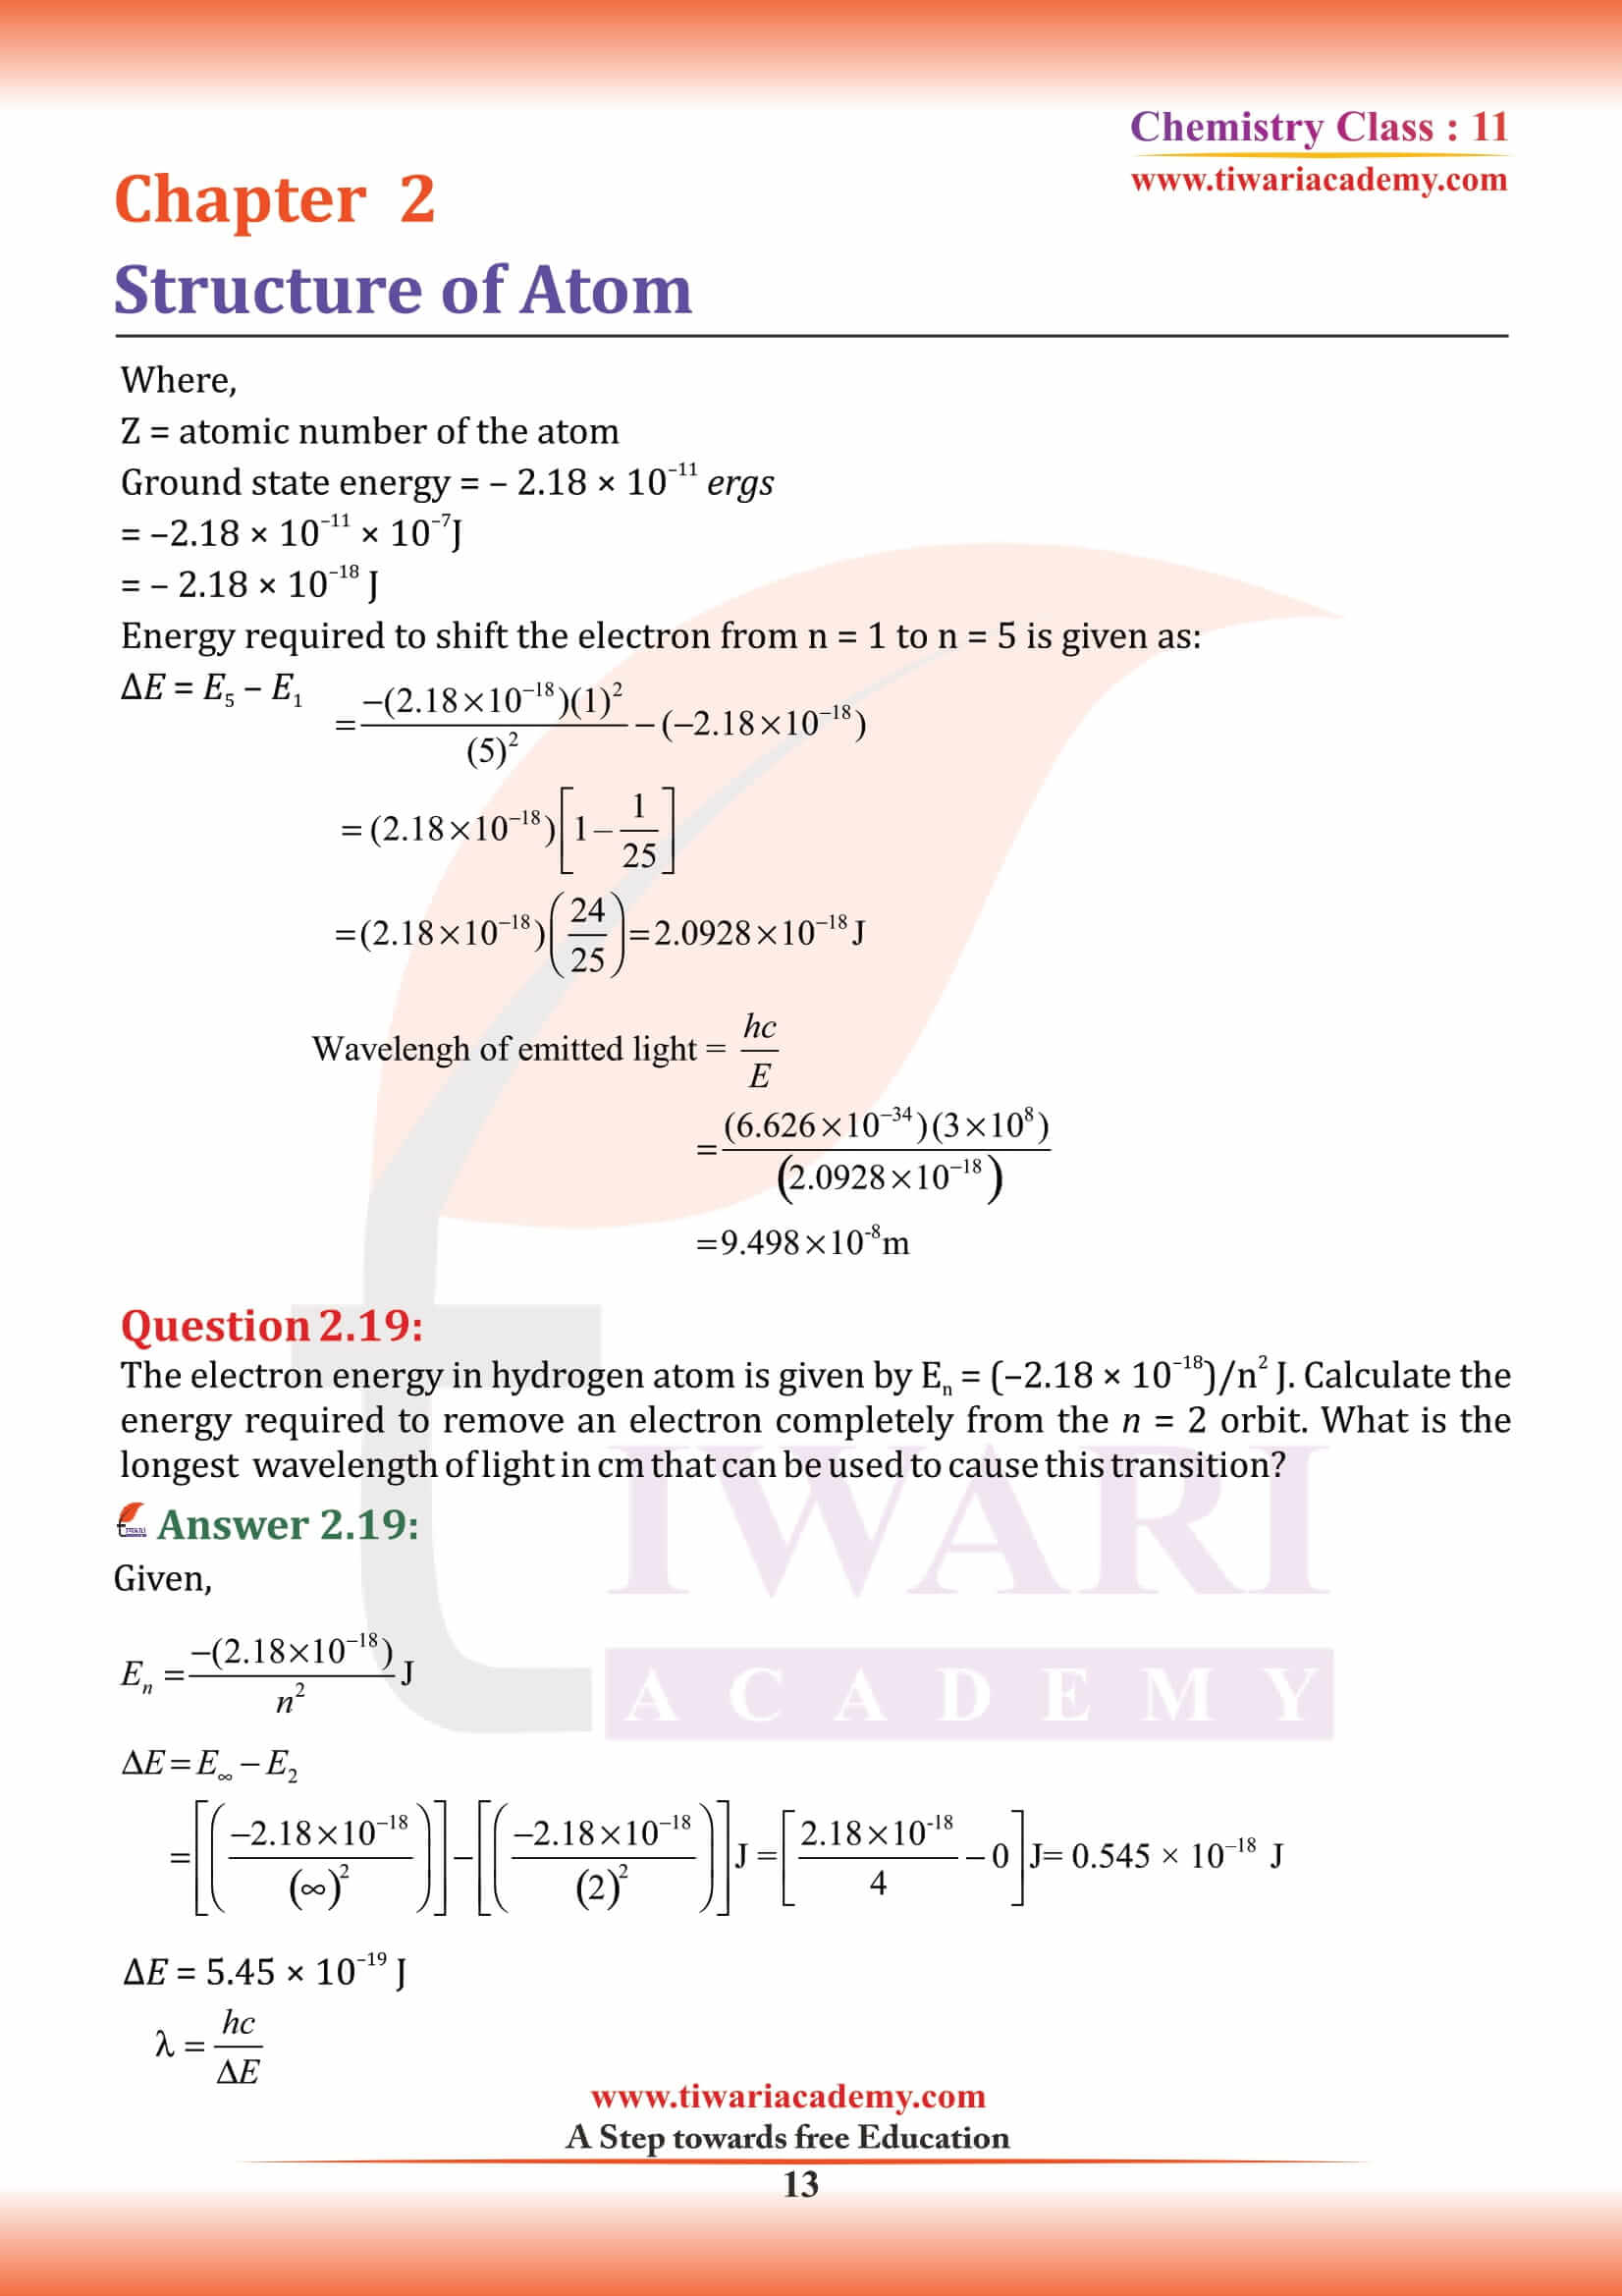 NCERT Solutions for Class 11 Chemistry Chapter 2 guide